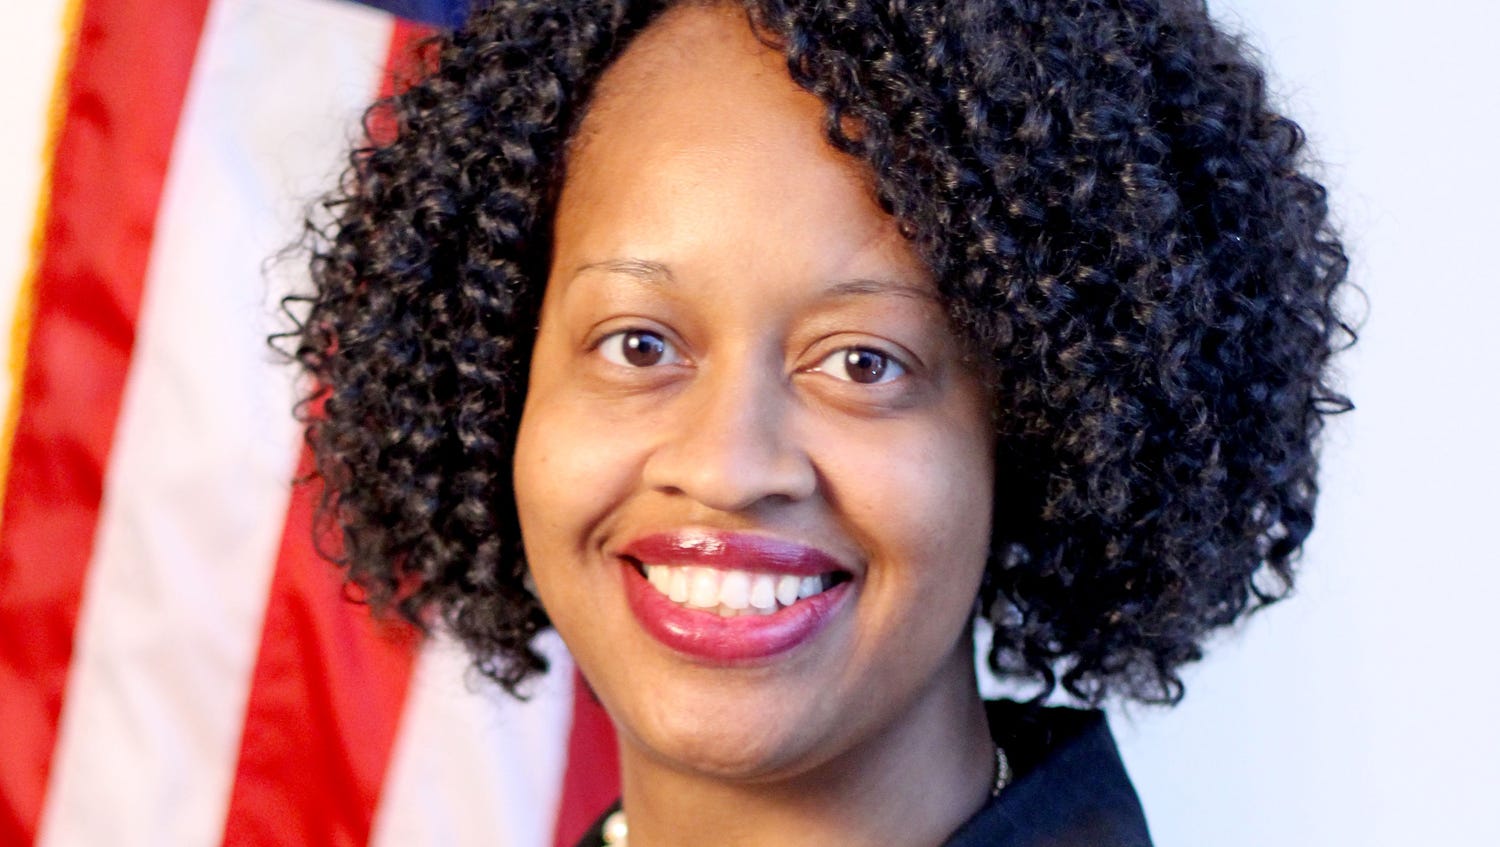 Assemblywoman Angela McKnight serves the 31st district and is a founder of AngelaCares, which supports young people    as well as senior citizens.